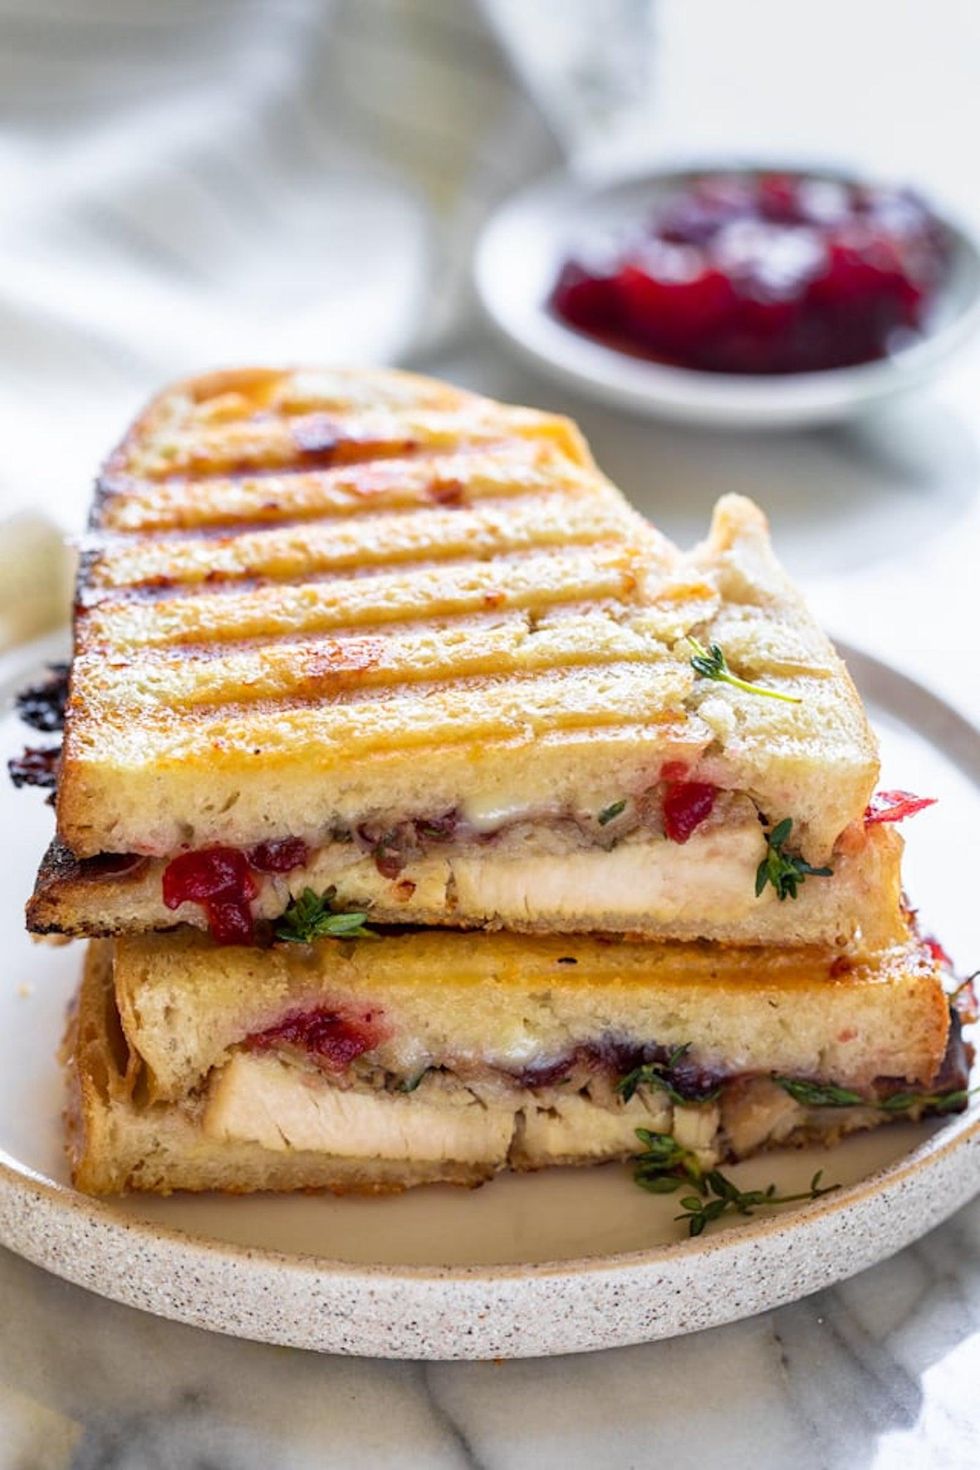 Turkey Panini recipe to eat for lunch